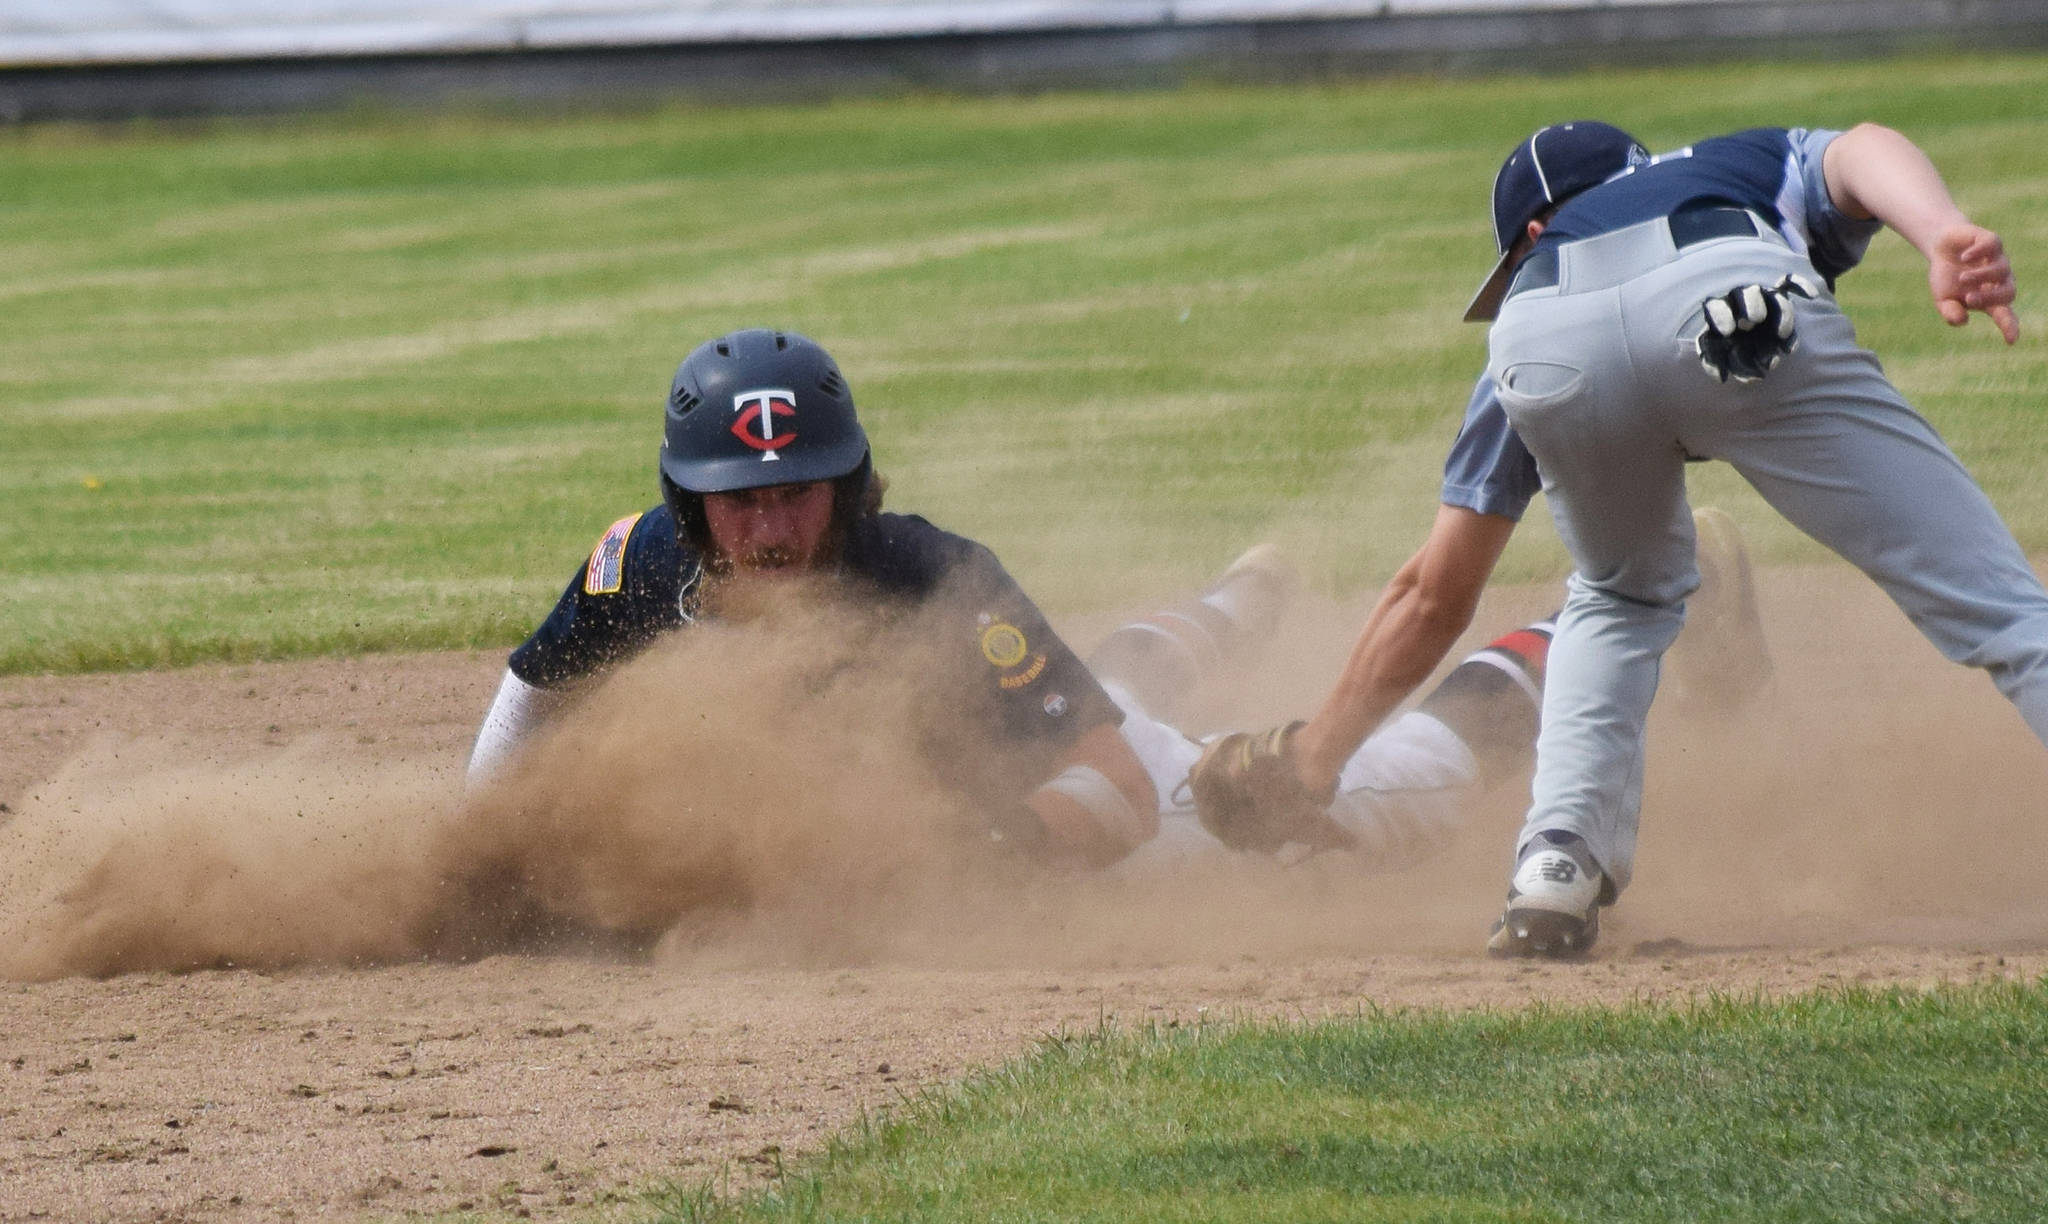 The Twins’ David Michael safely slides into second base ahead of the tag of Eagle River’s Devin Wilcox (right) Tuesday at the Bill Miller Big Fish Wood Bat Tournament at Coral Seymour Memorial Park in Kenai. (Photo by Joey Klecka/Peninsula Clarion